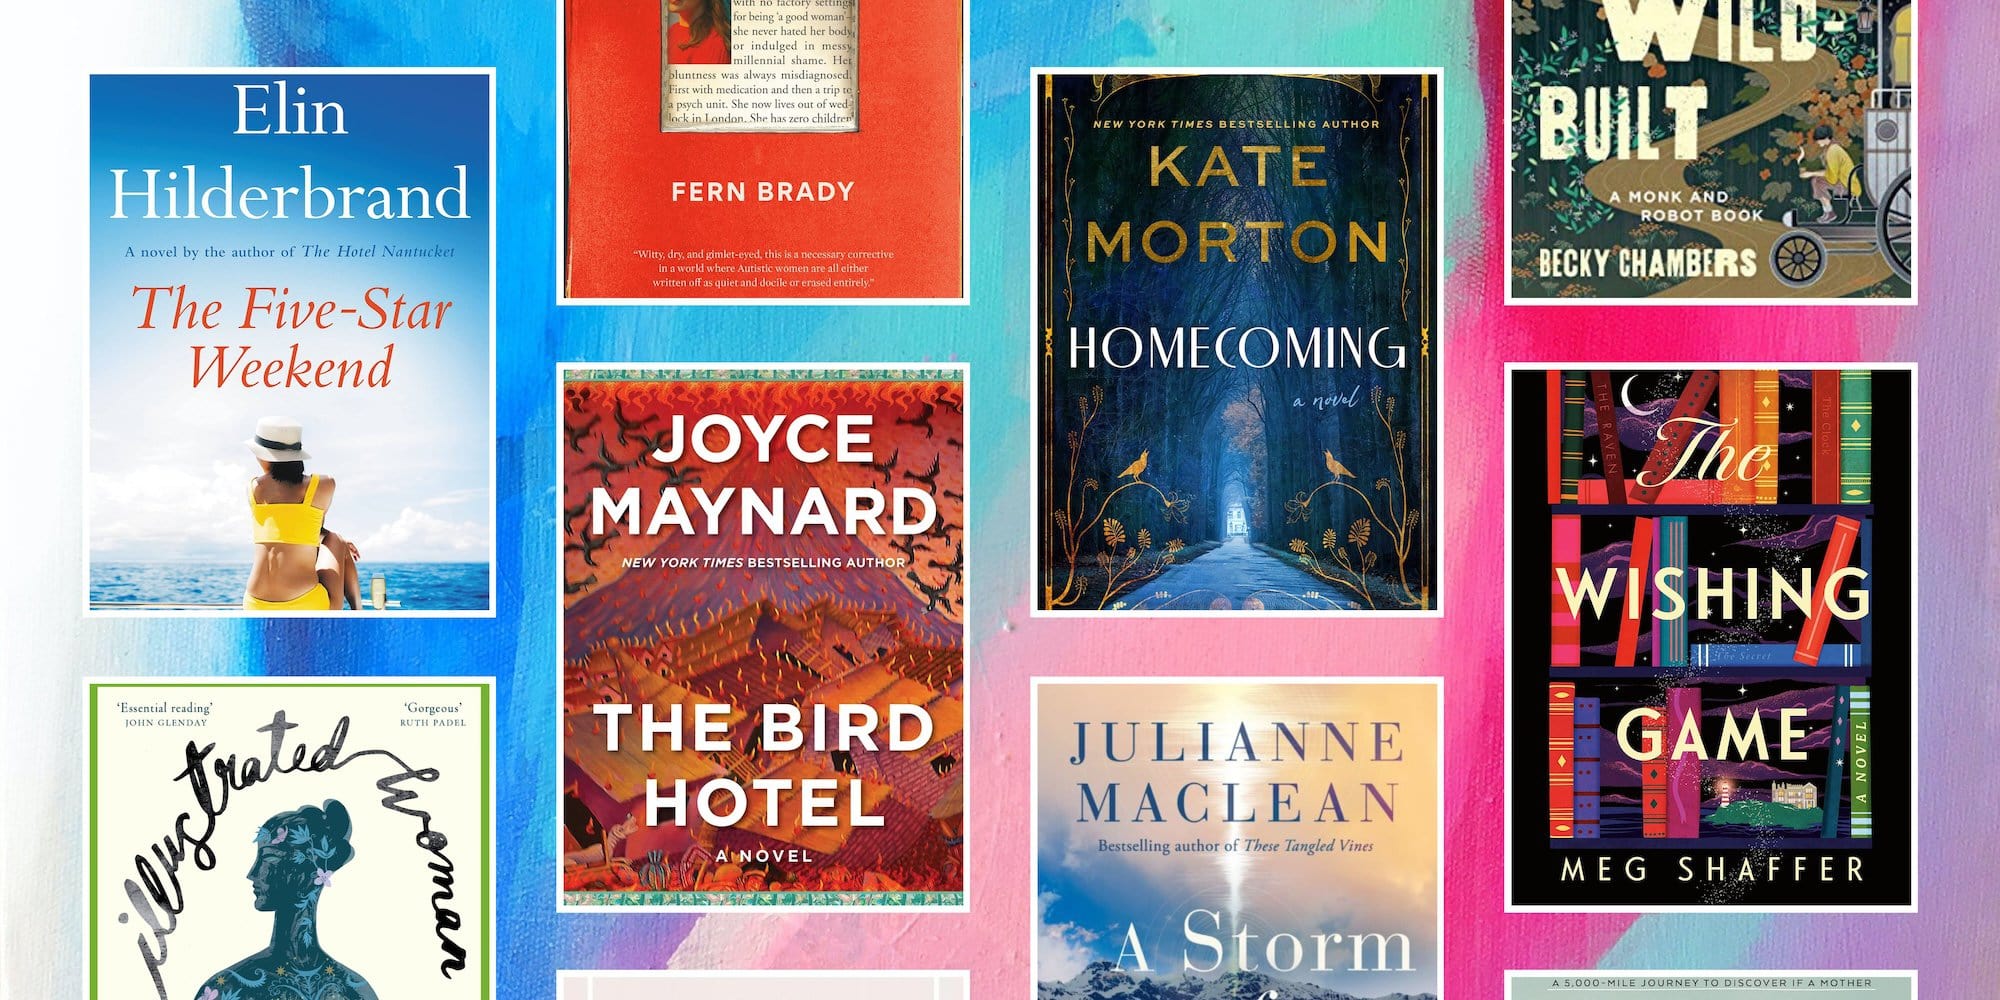 15 of the best books for women to read in 2023 - Tolstoy Therapy